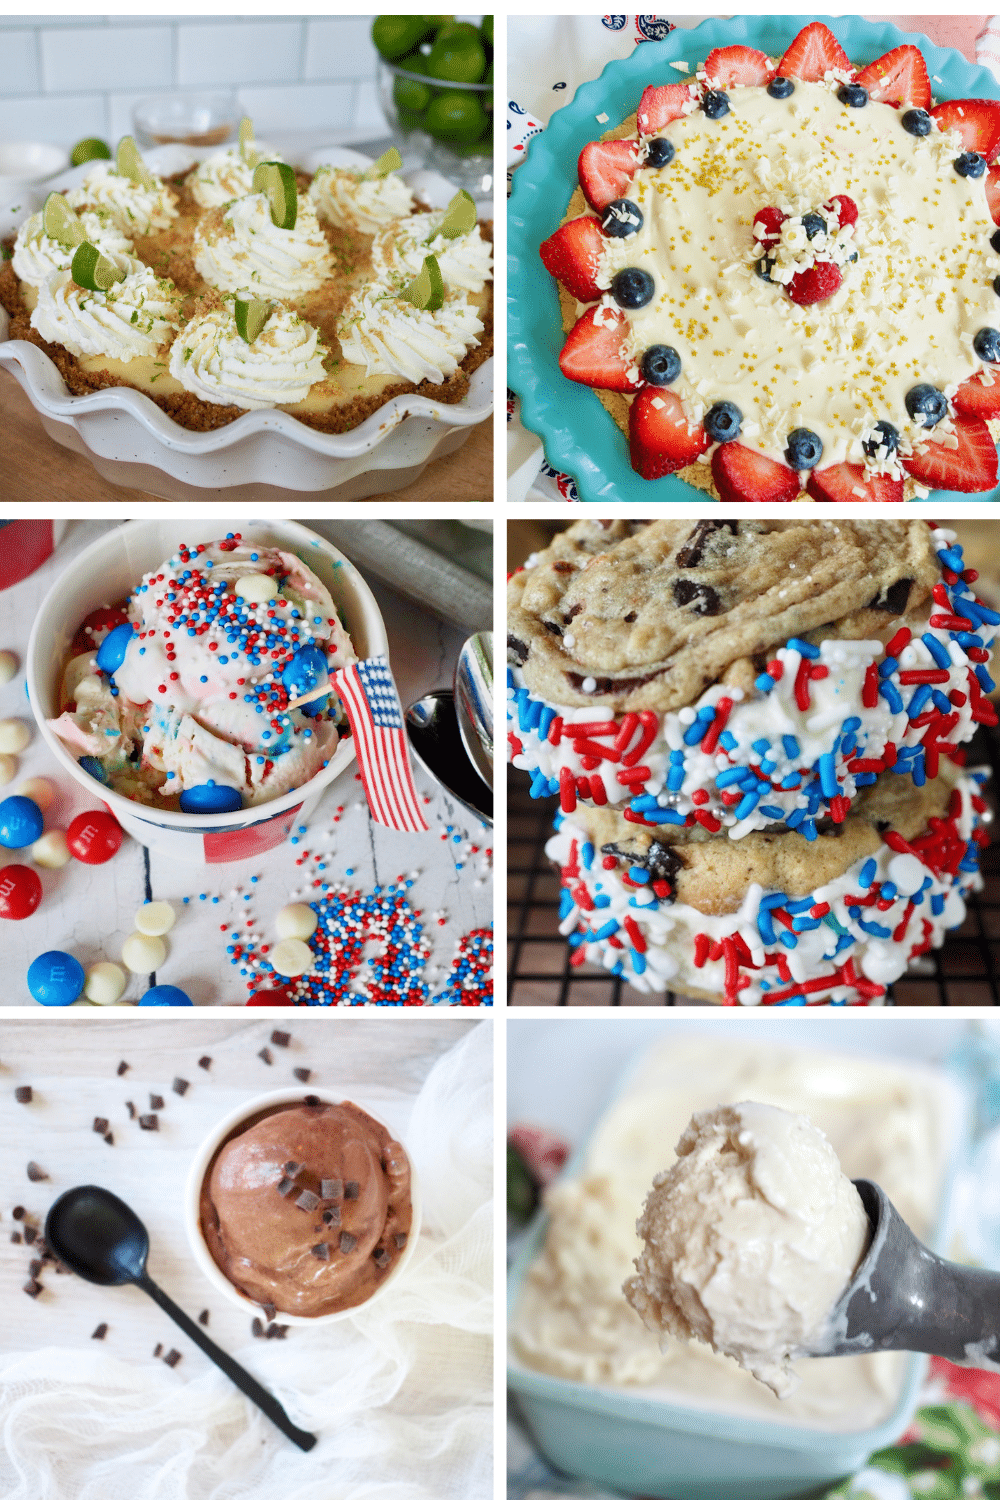 6 image grid of desserts to make for independence day, l-f key lime pie, lemon ice box pie, patriotic ice cream, ice cream cookie sandwiches, homemade chocolate ice cream, old-fashioned vanilla bean ice cream.